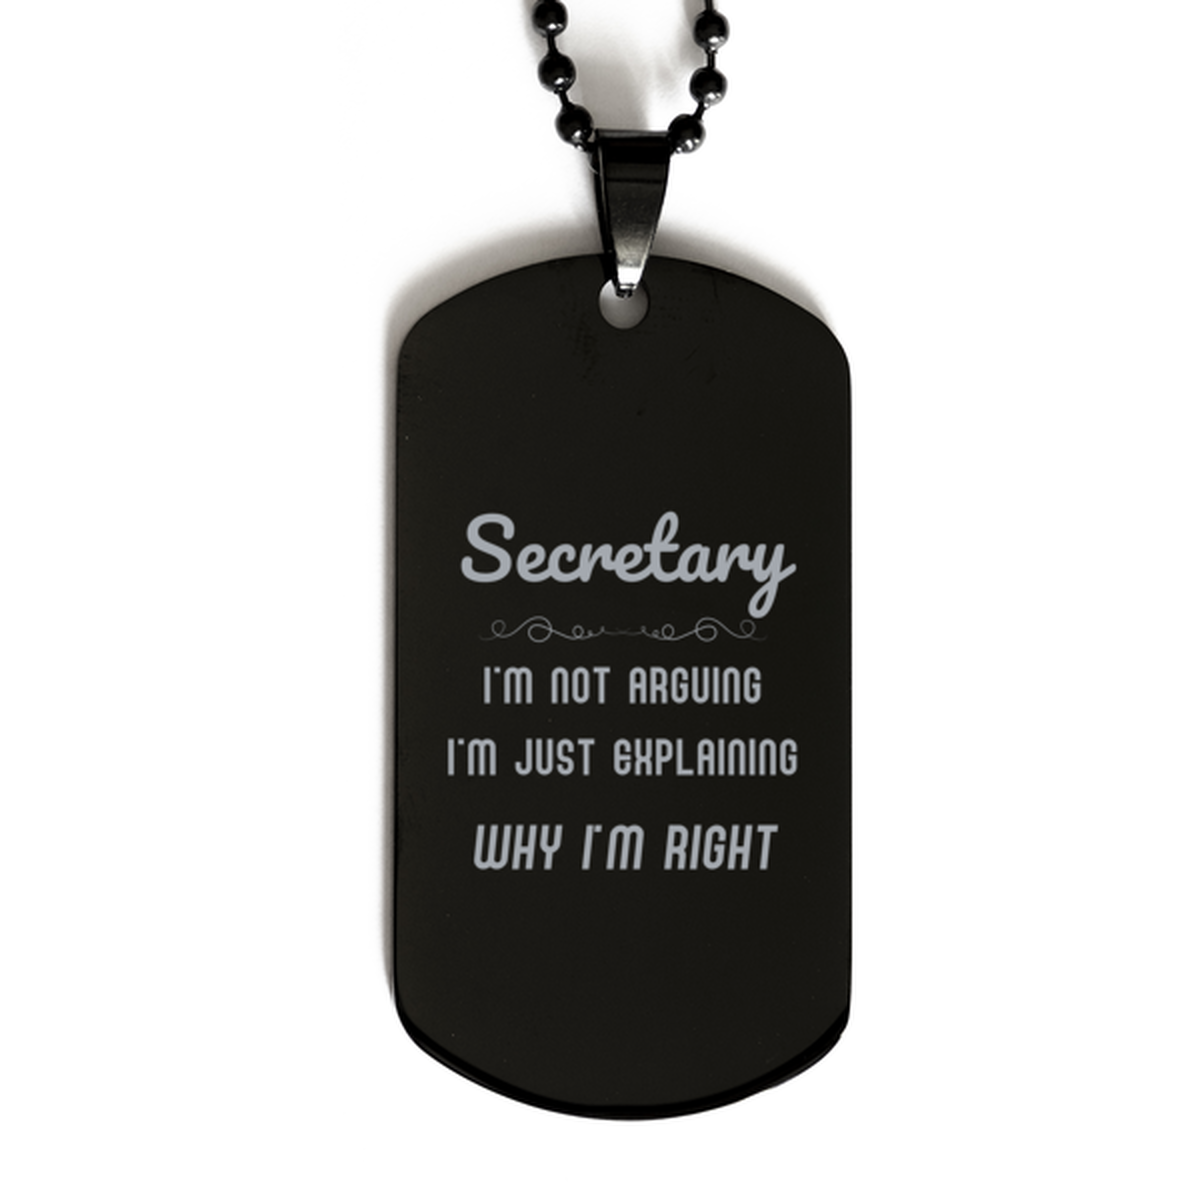 Secretary I'm not Arguing. I'm Just Explaining Why I'm RIGHT Black Dog Tag, Funny Saying Quote Secretary Gifts For Secretary Graduation Birthday Christmas Gifts for Men Women Coworker